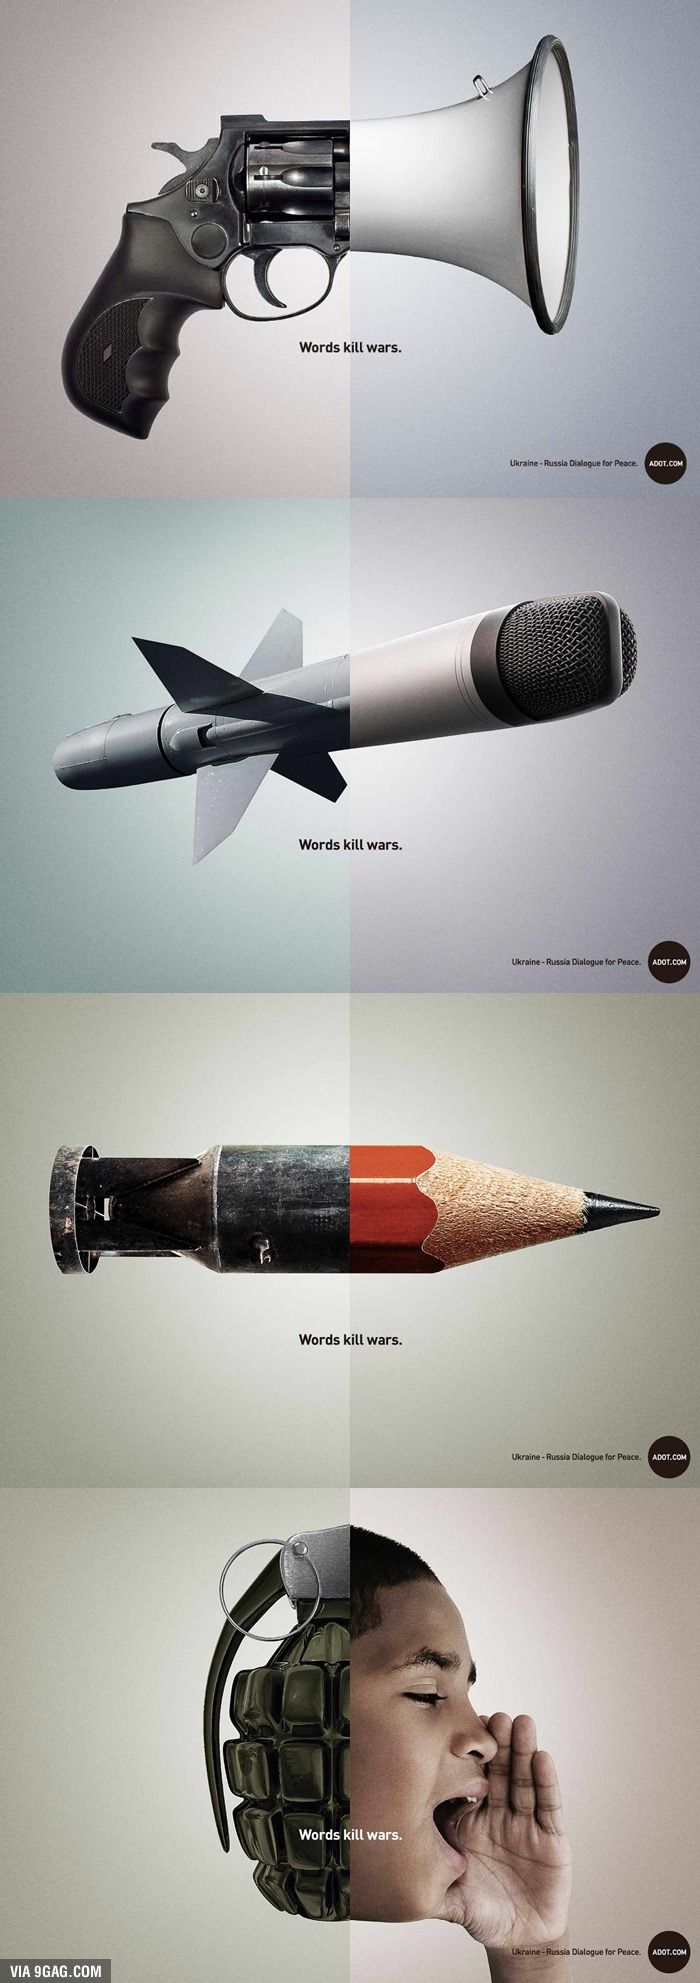 Print-Advertising-This-ad-promotes-talking-about-issues-instead-of-resorting-to-violence.-It-trans Creative Advertising : Creative Ads: Words kill wars.